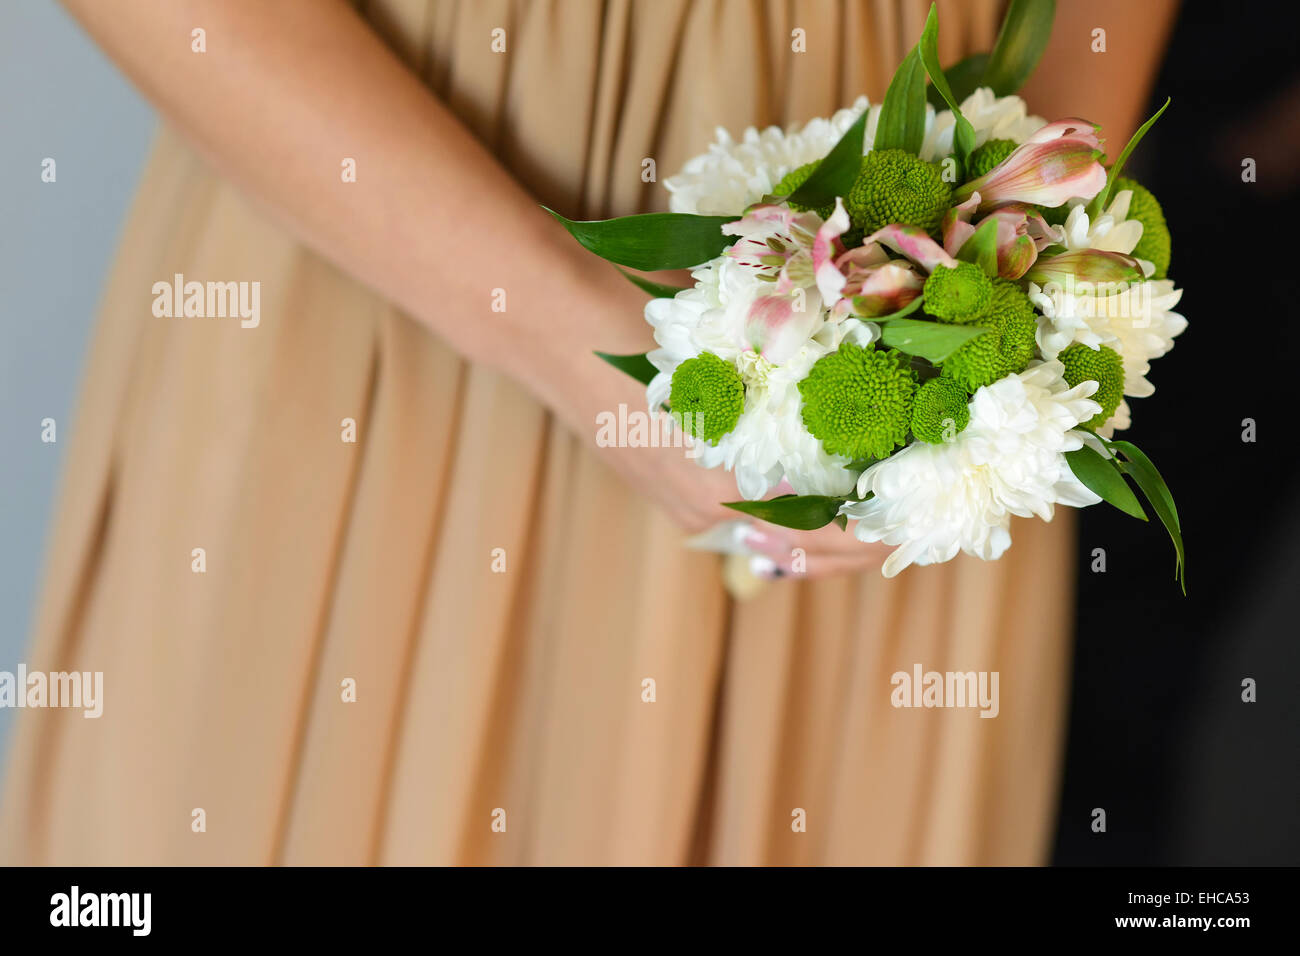 Bridesmaid holding in her hands a bouquet of flowers Stock Photo